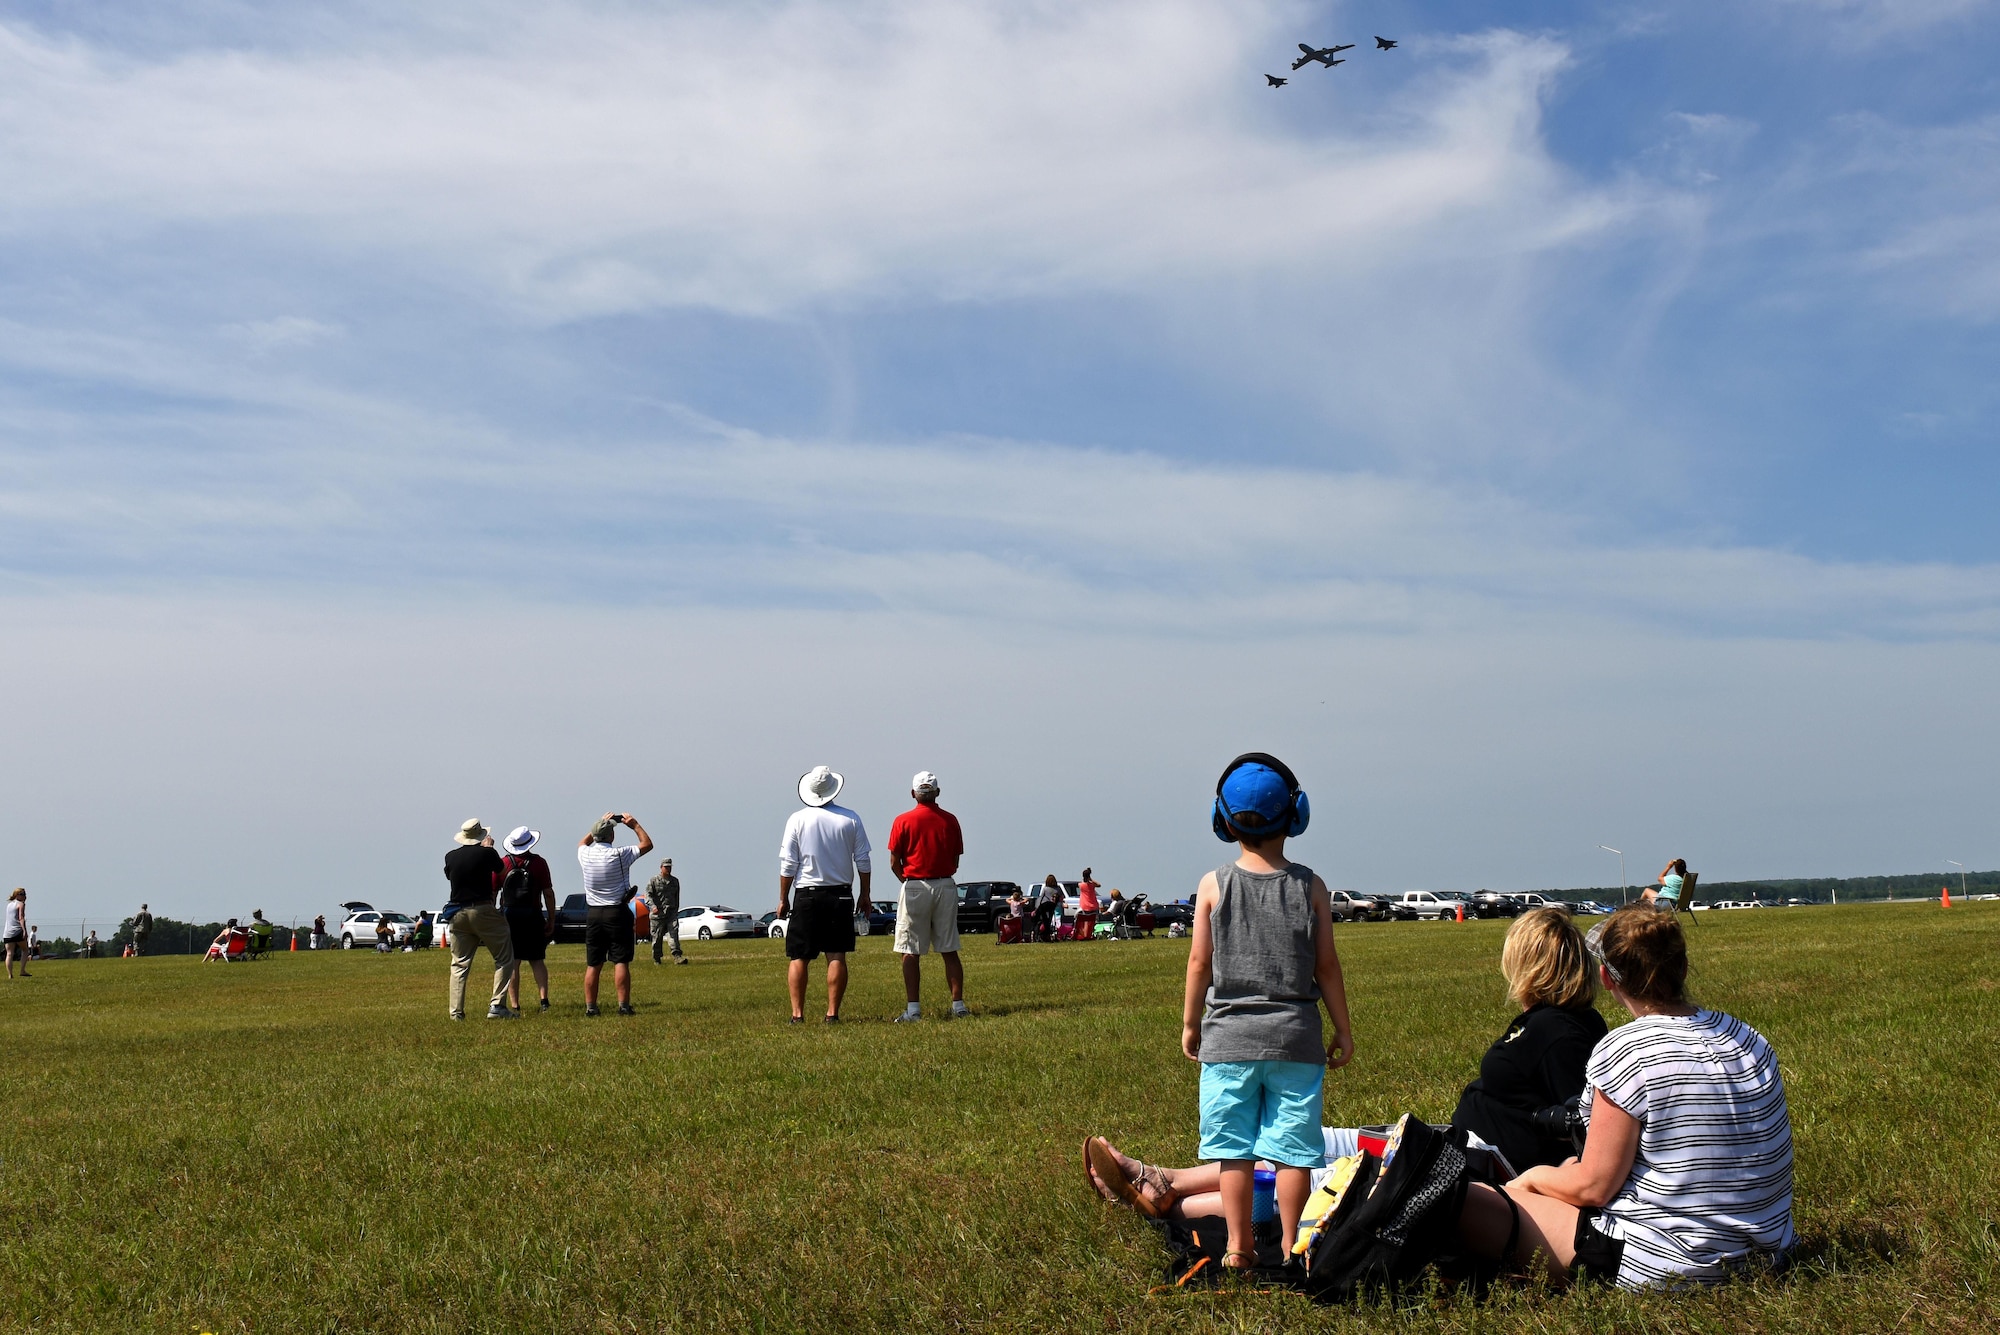 Members of Team Seymour observe a practice air show, May 19, 2017, during a dry-run at Seymour Johnson Air Force Base, North Carolina. In preparation of the Wings Over Wayne 2017 Air Show, all Department of Defense members and their families were invited to attend the performers’ practice runs. (U.S. Air Force photo by Senior Airman Ashley Maldonado)